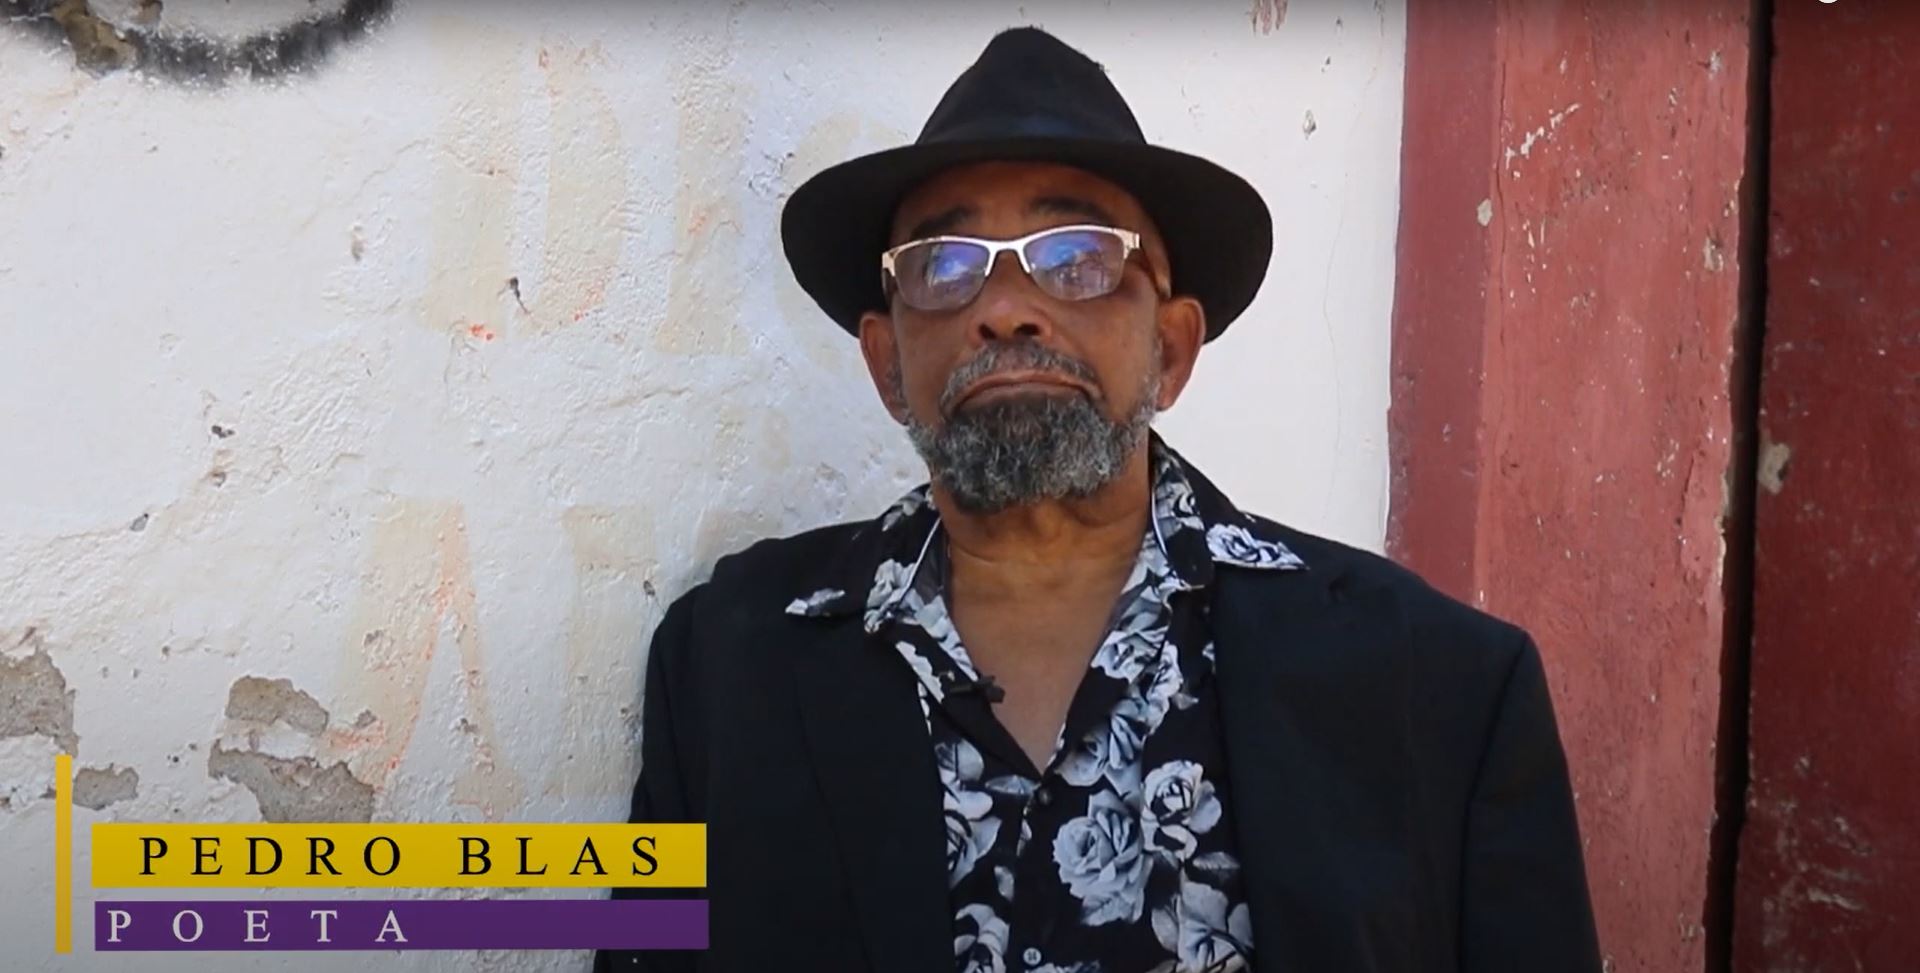 An interview with the Afro-Colombian poet, Pedro Blas Julio Romero, carried out on a street in Cartagena, Colombia.